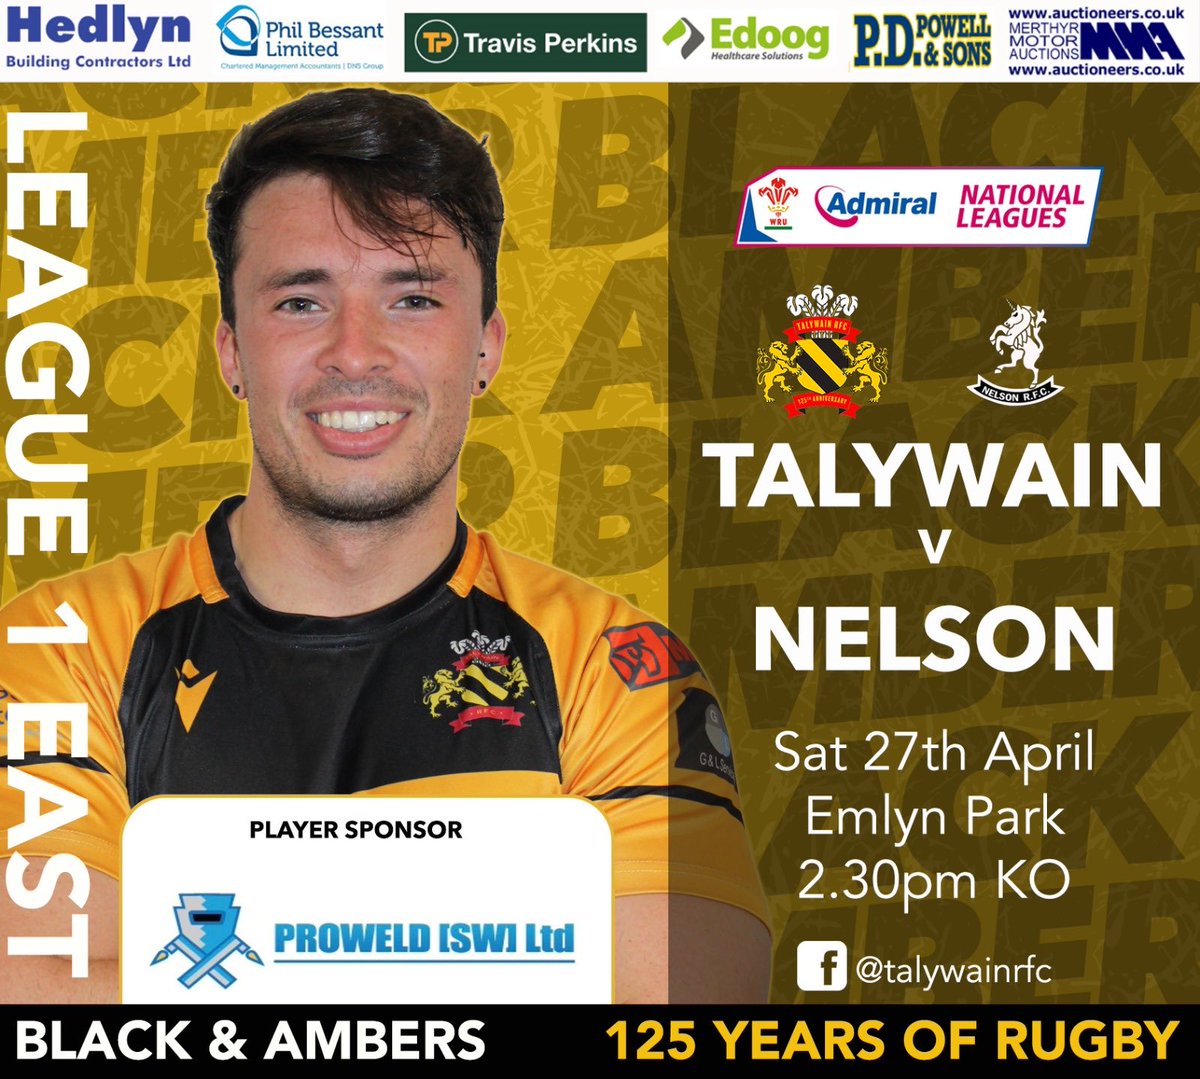 This weekend we entertain Nelson in our penultimate home game of the season. Nelson are still in contention for a promotion spot so this should be a great game. The support we received last weekend was phenomenal so lets continue in that vein this Saturday. 🖤💛🖤💛